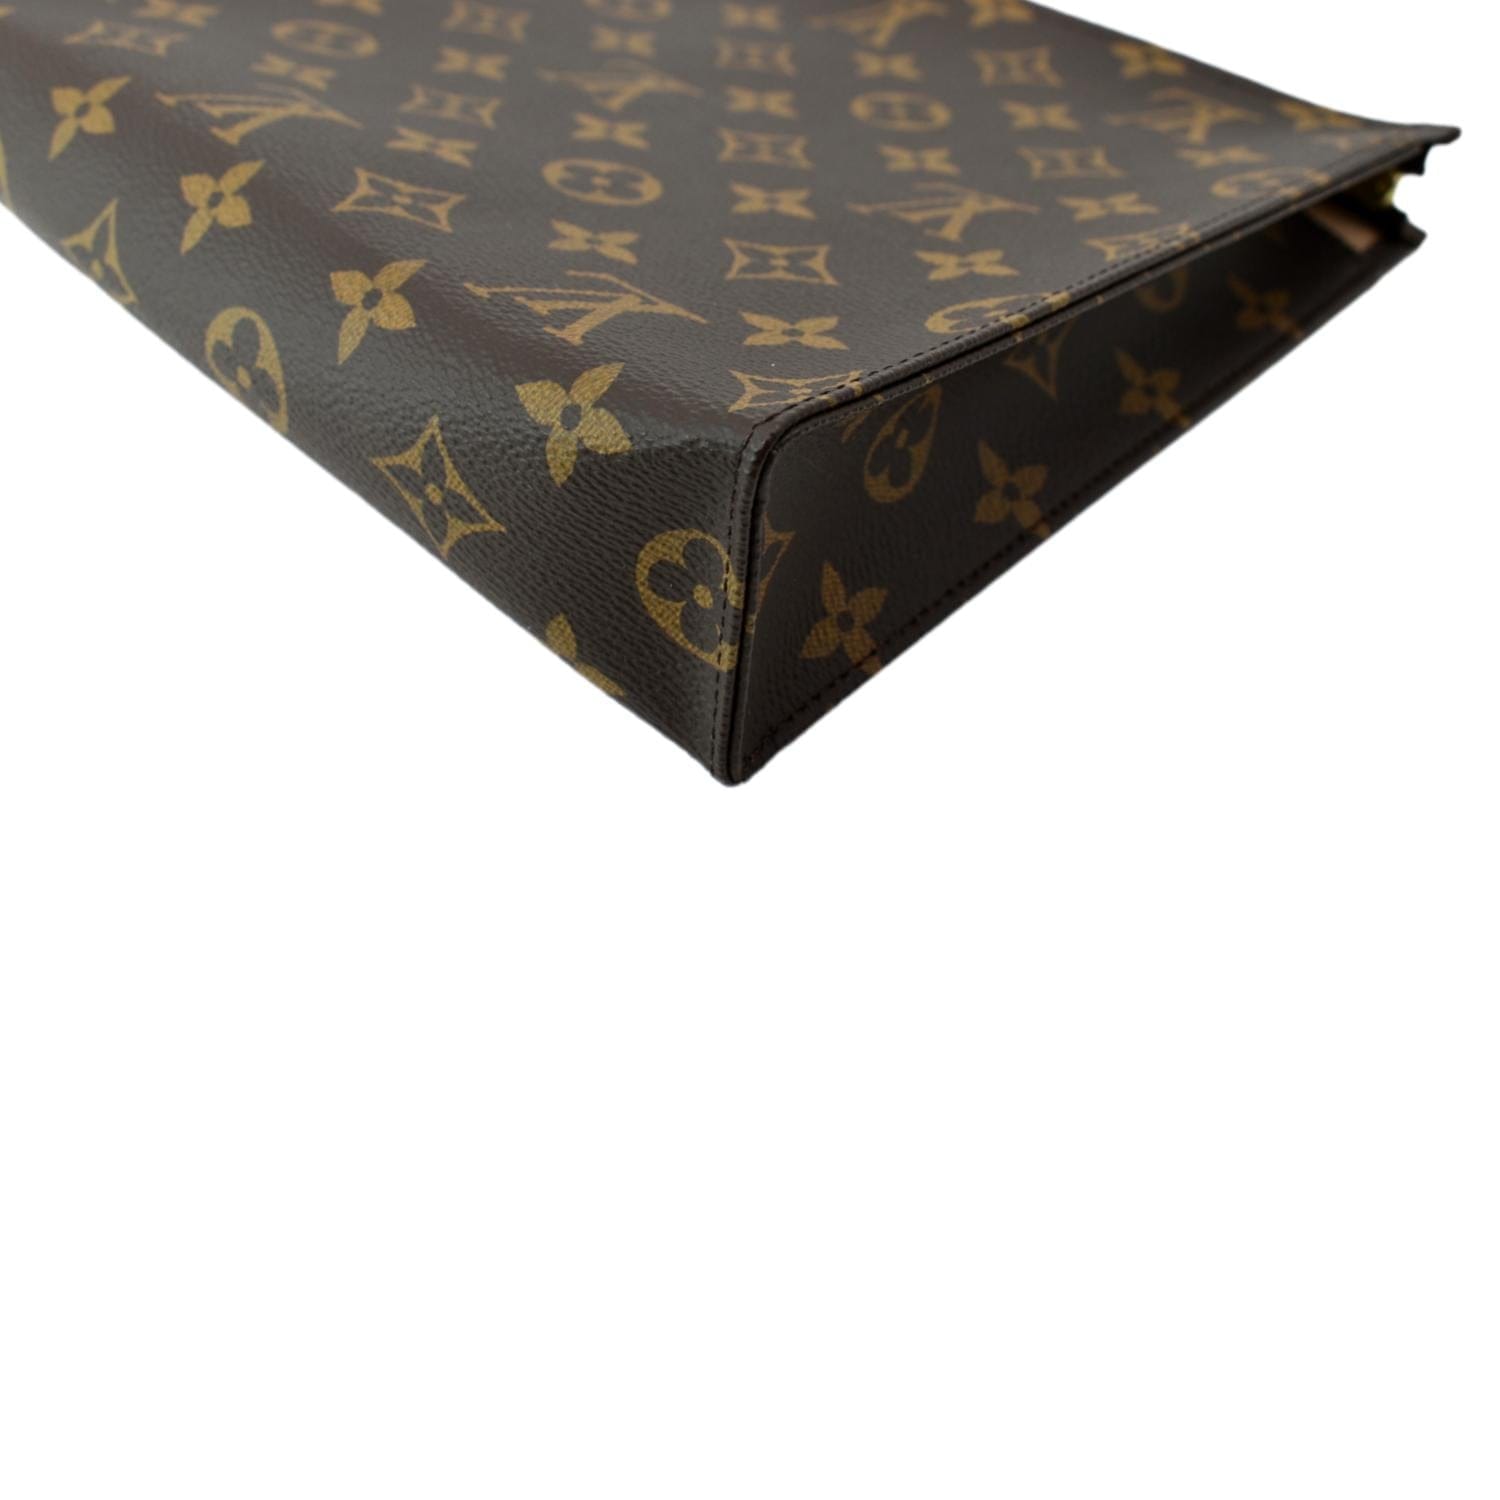 Louis Vuitton Monogram Toiletry Pouch 26 - Brown Cosmetic Bags, Accessories  - LOU797607